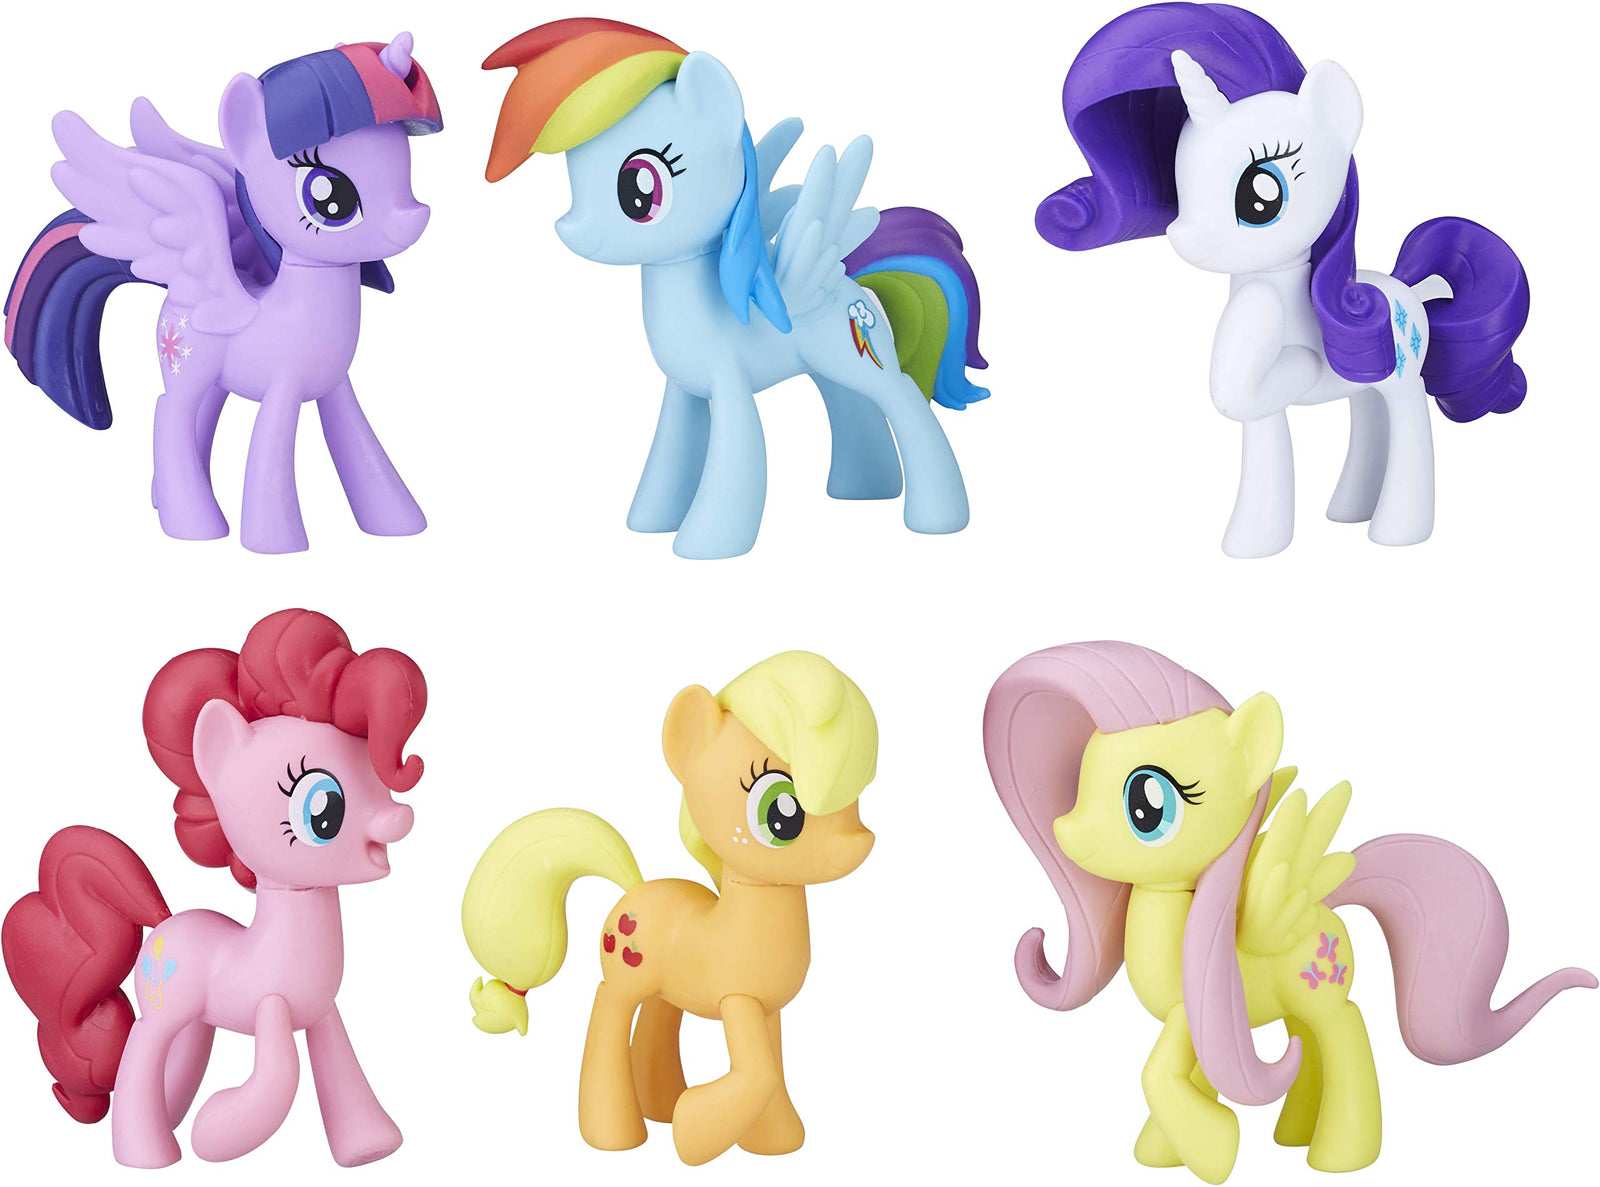 My Little Pony Toys Meet The Mane 6 Ponies Collection (Amazon Exclusive)